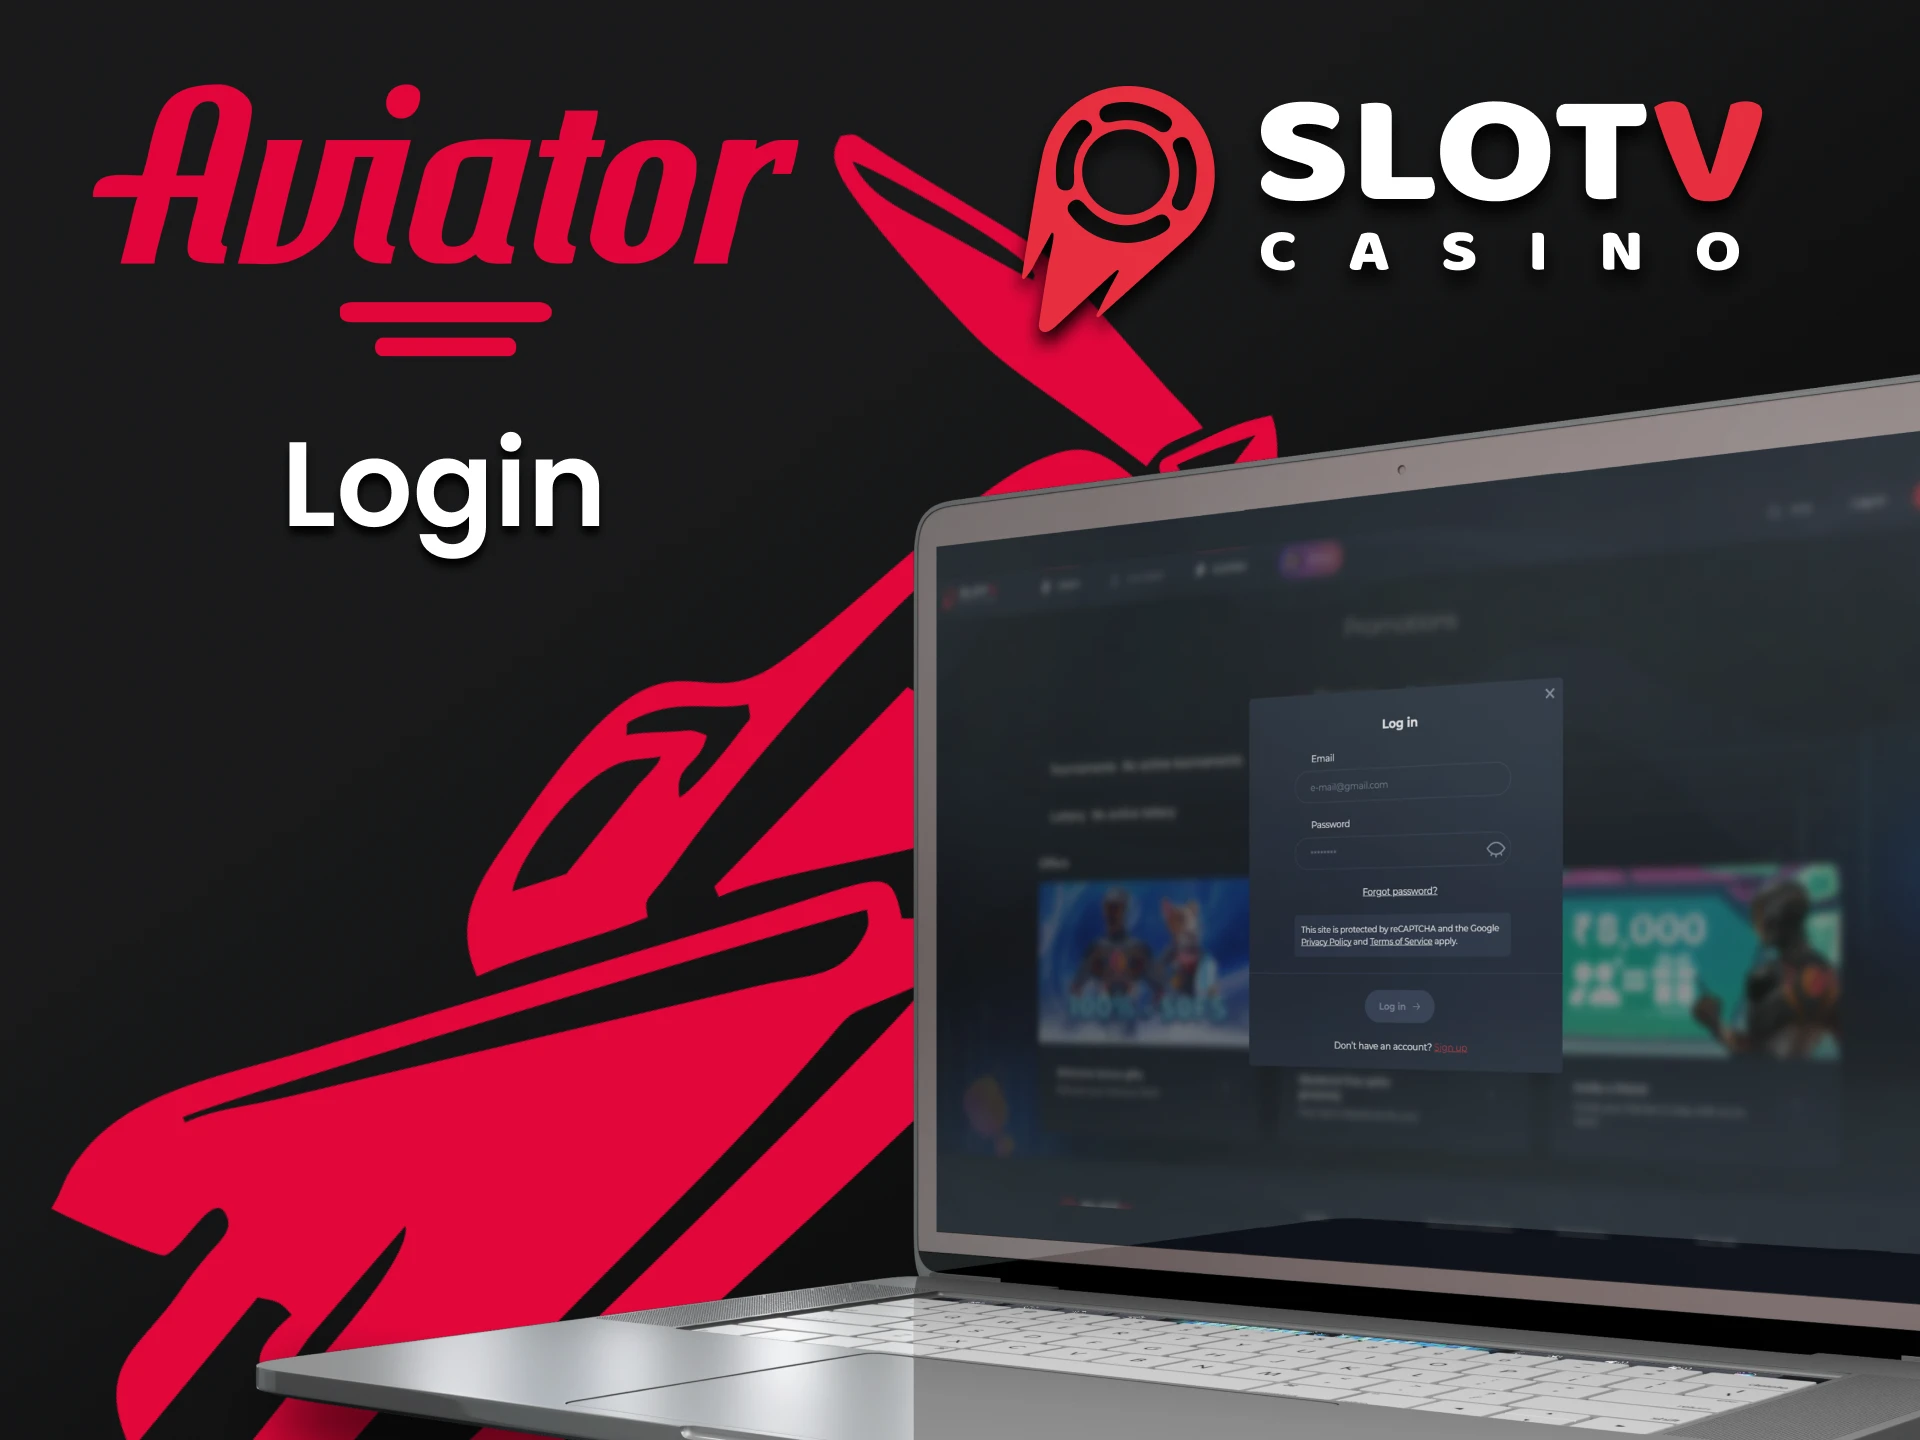 Log in to your personal LostV account to play Aviator.